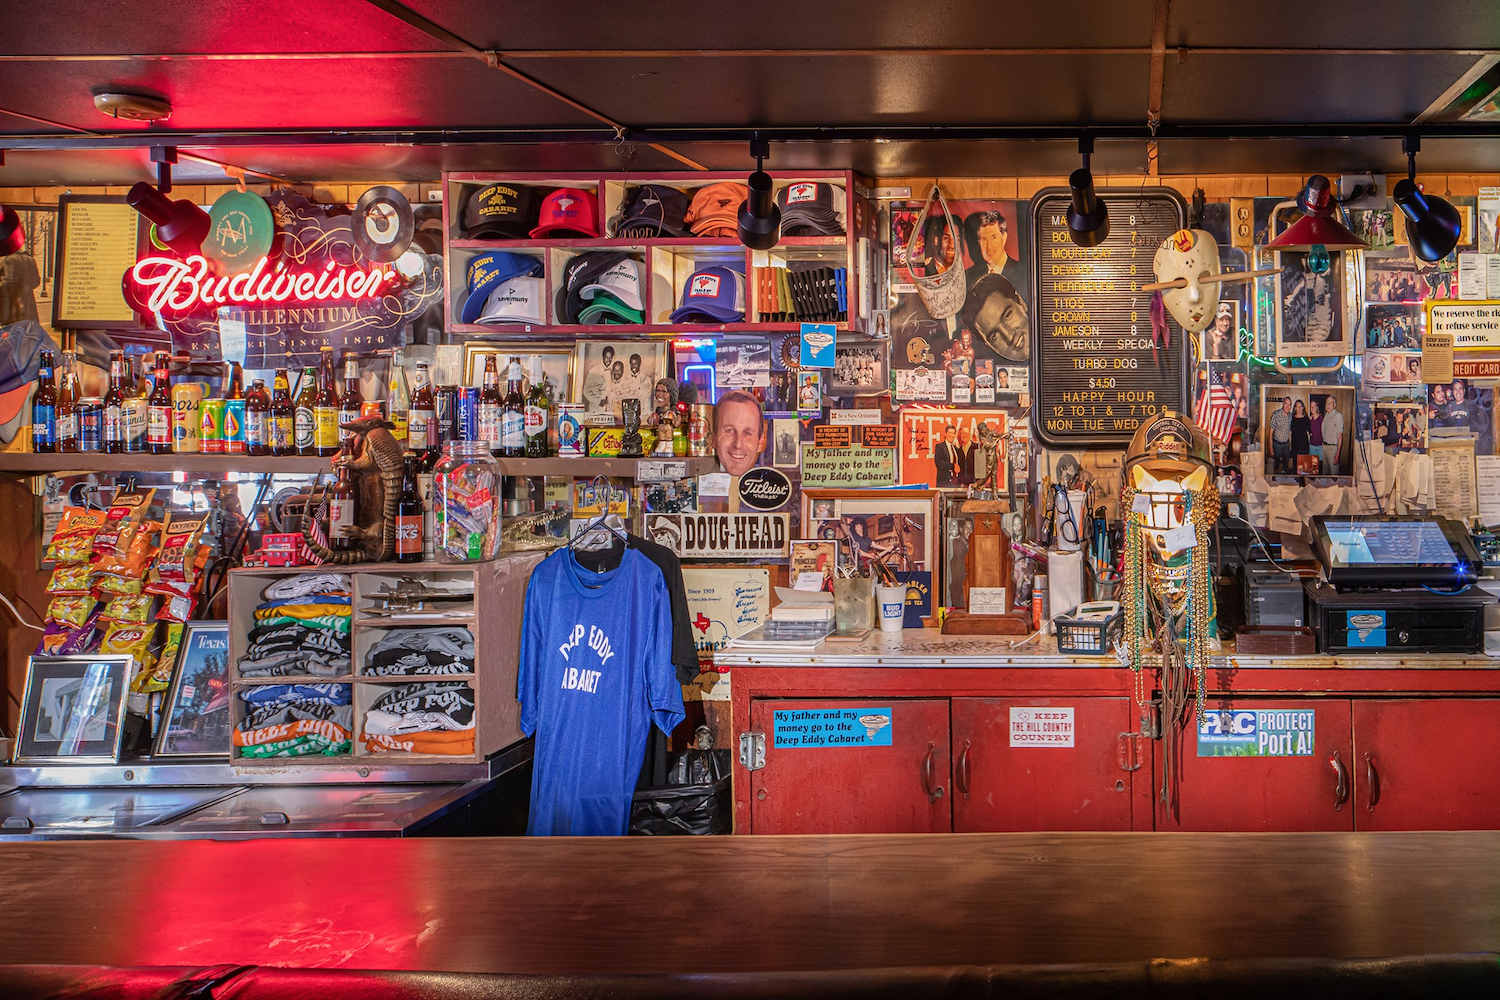 Posters, hats, merchandise, sweaters and food hung up along the wall behind a bar.